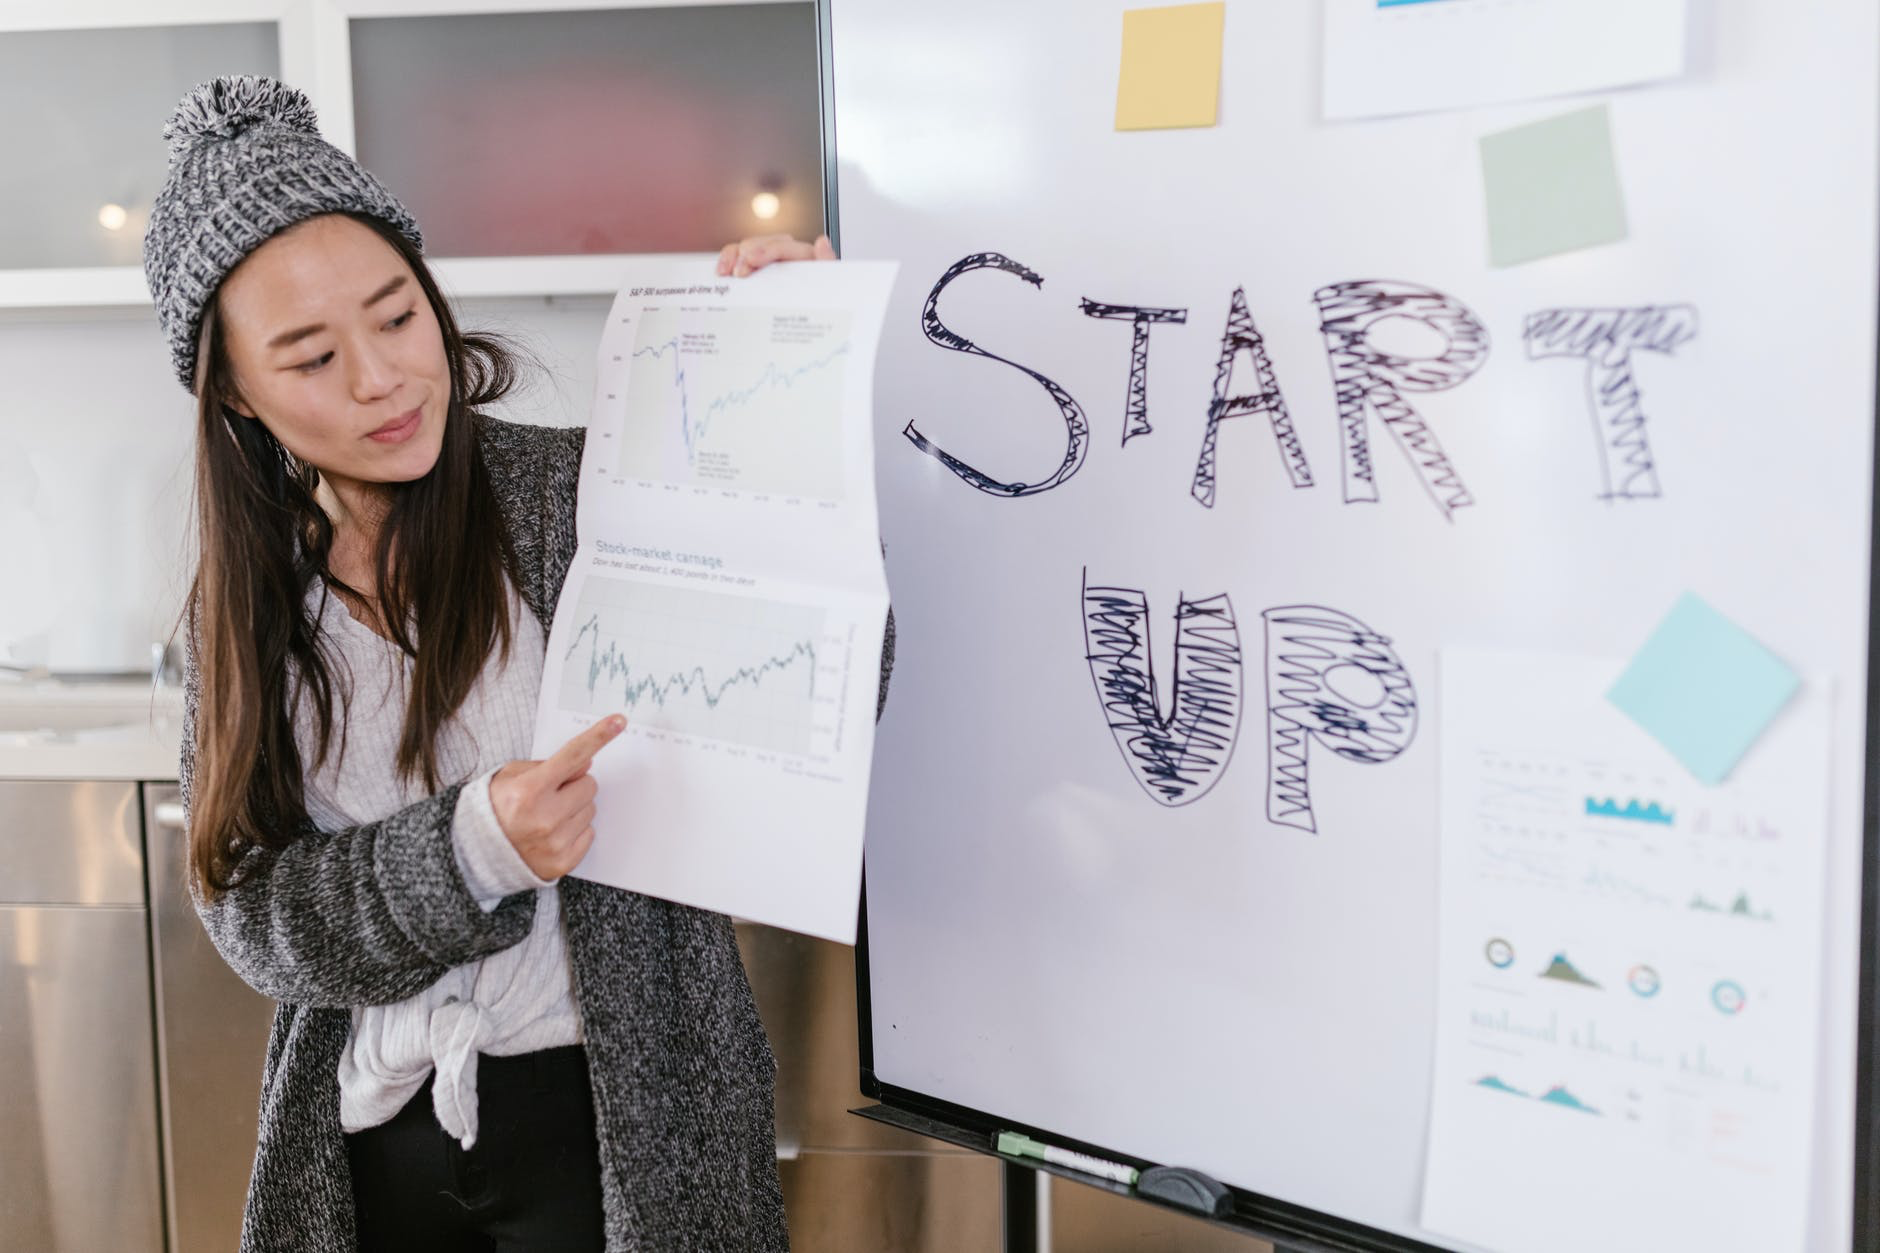 a woman points to a graph of data while a poster next to her reads "Start Up"